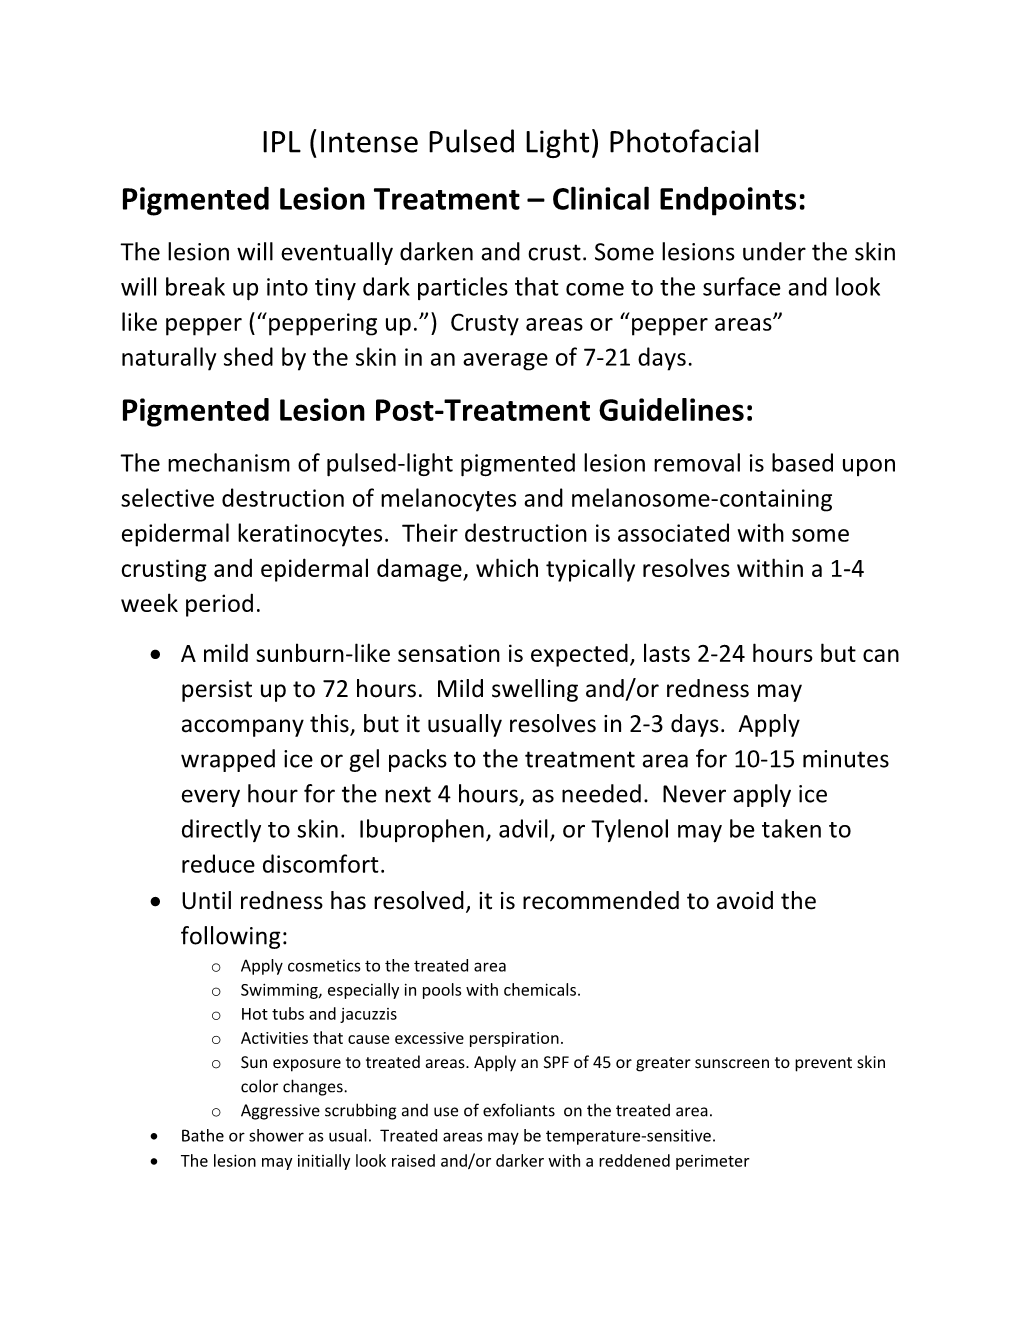 Intense Pulsed Light) Photofacial Pigmented Lesion Treatment – Clinical Endpoints: the Lesion Will Eventually Darken and Crust